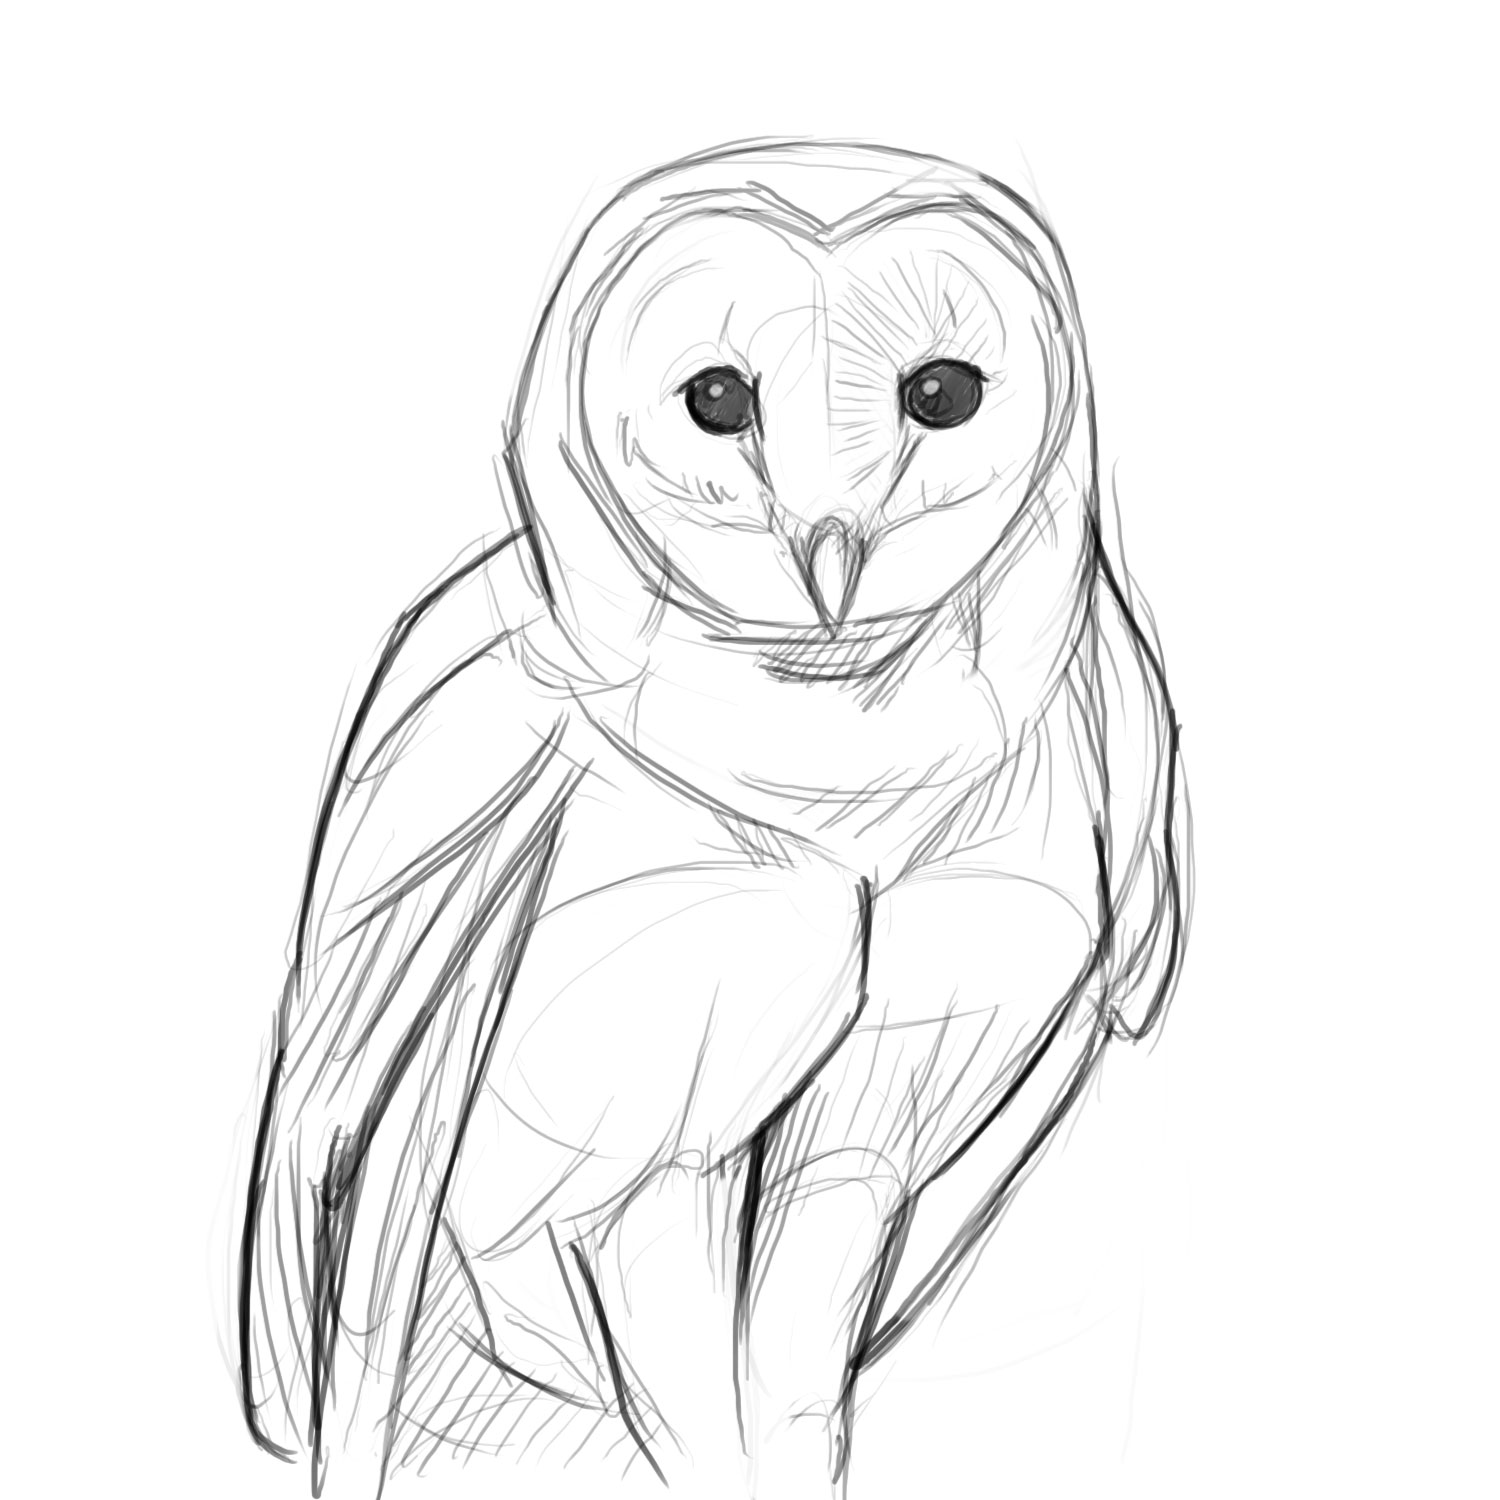 Creative Owl Profil Sketch Drawing for Adult